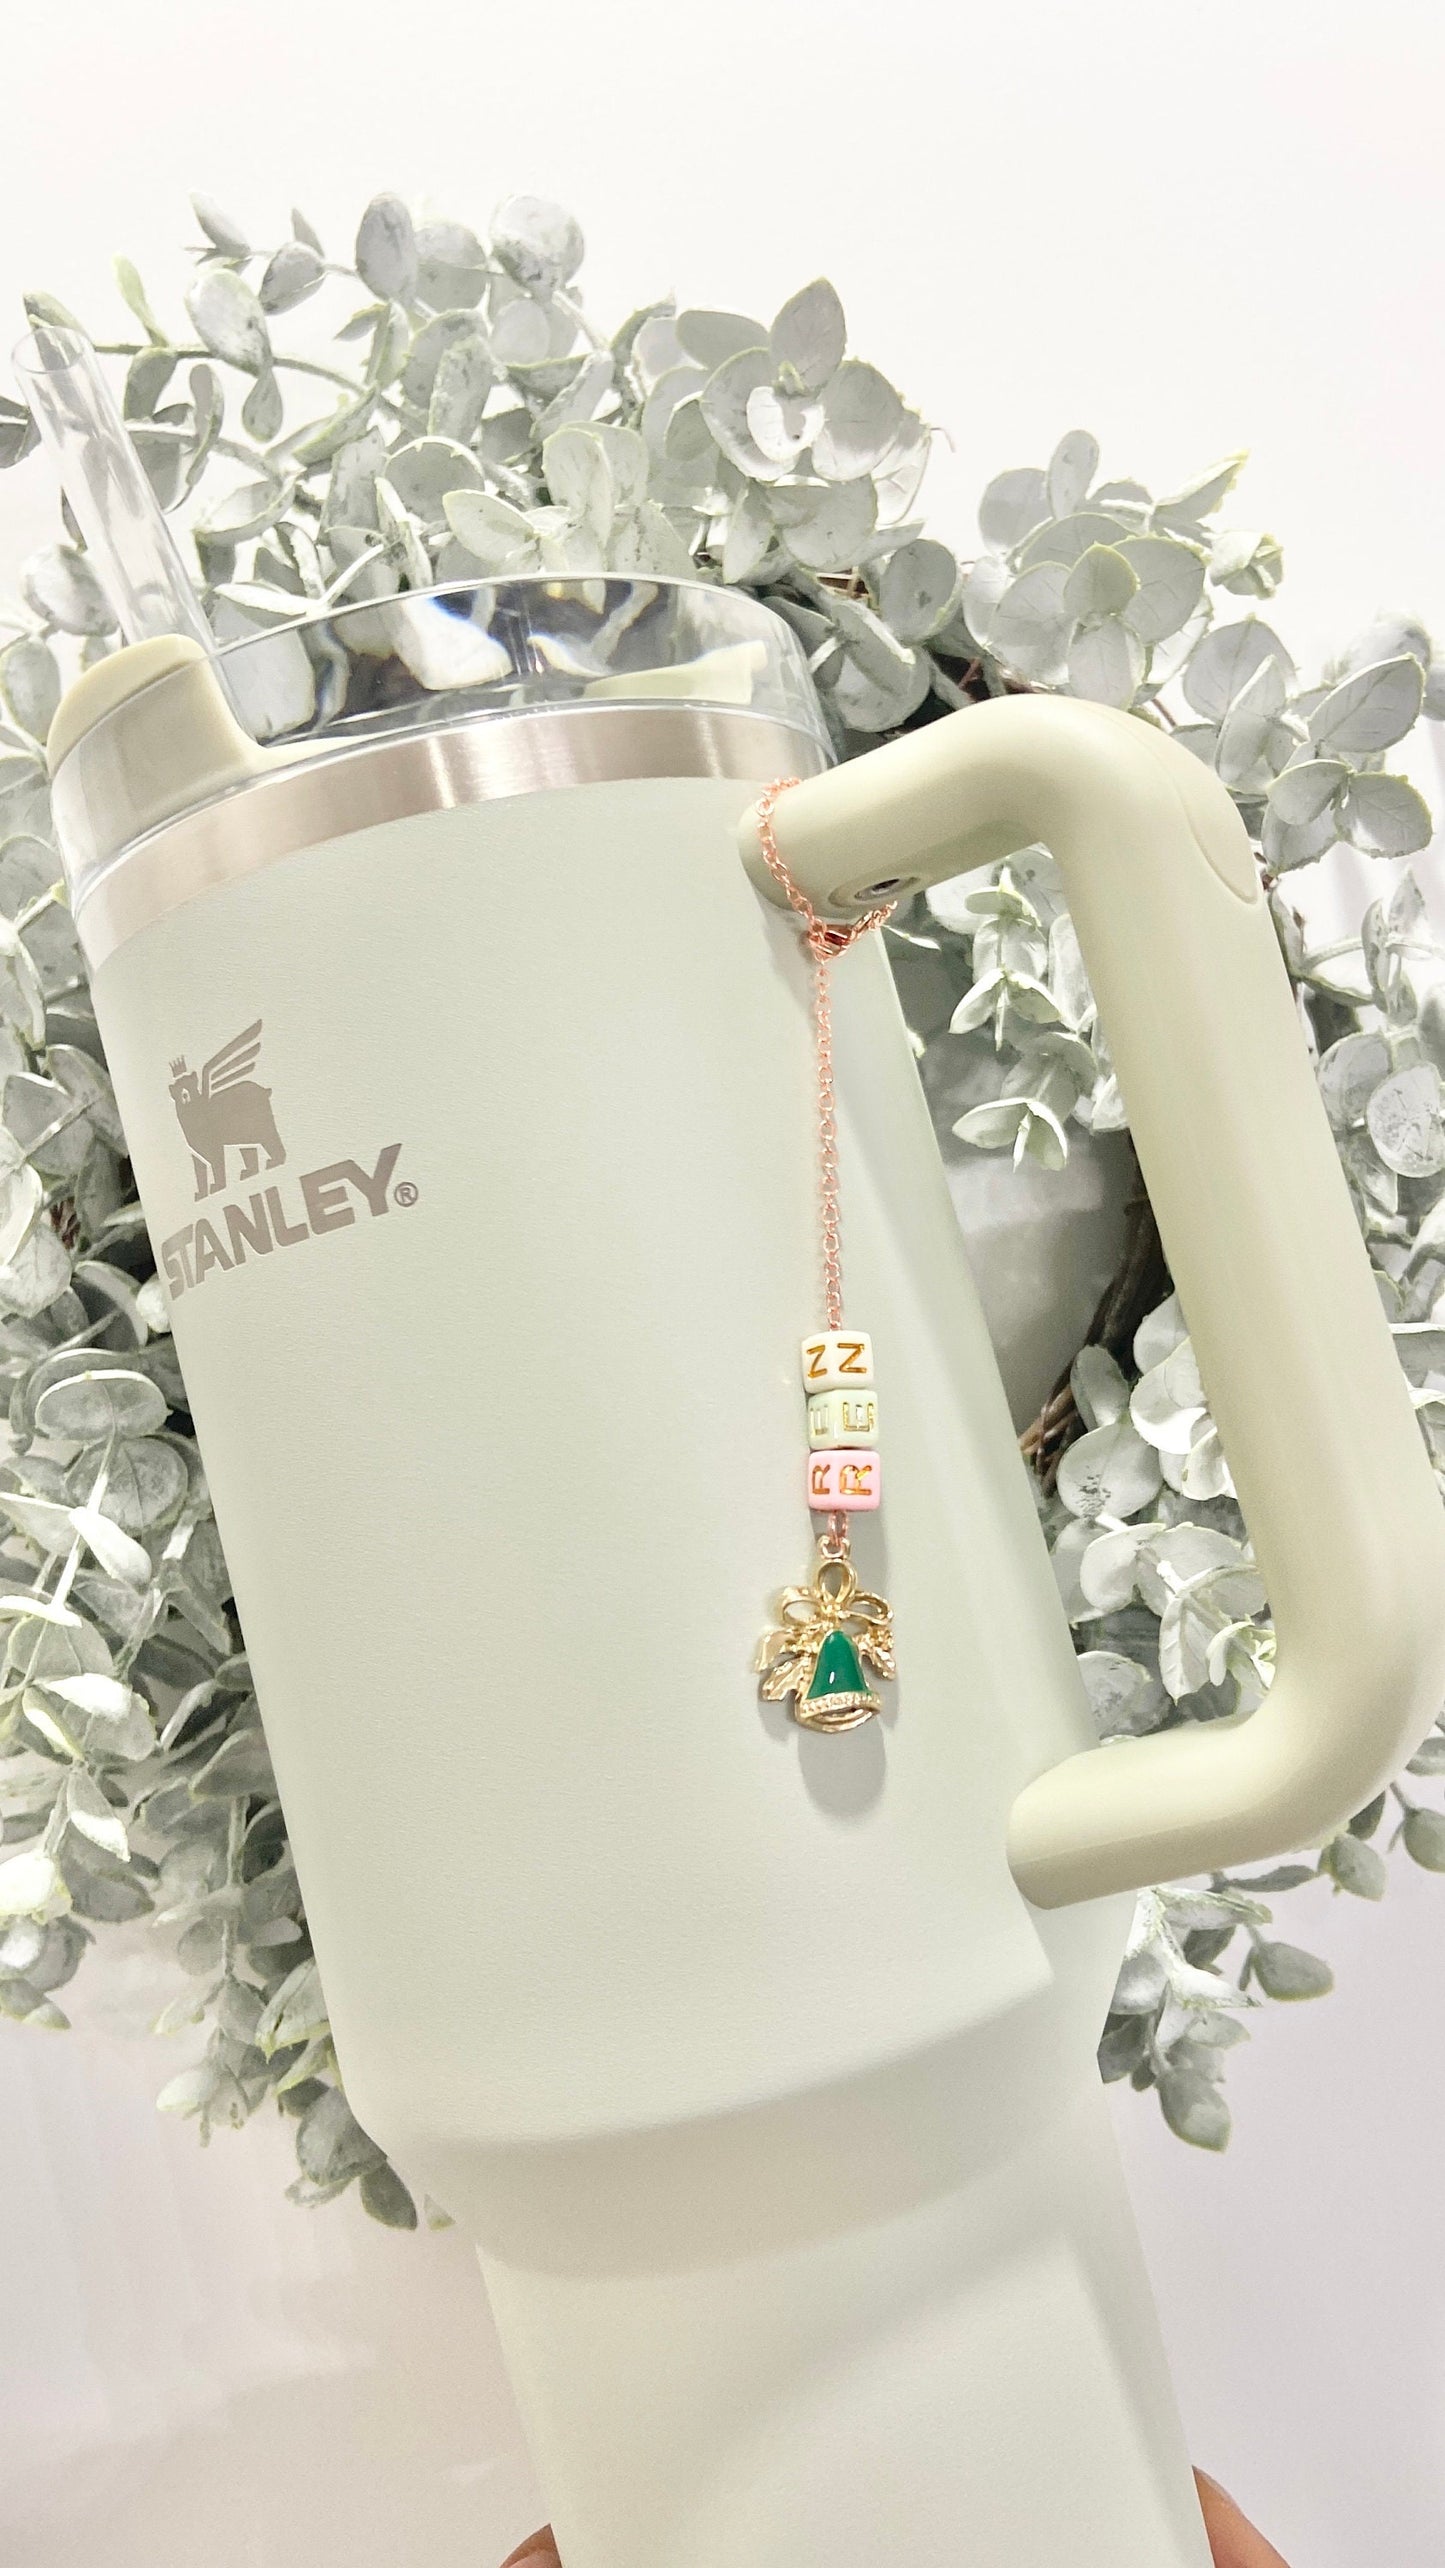 Stanley Tumbler Charm Stanley Cup Charm Water Bottle Charm Tumbler